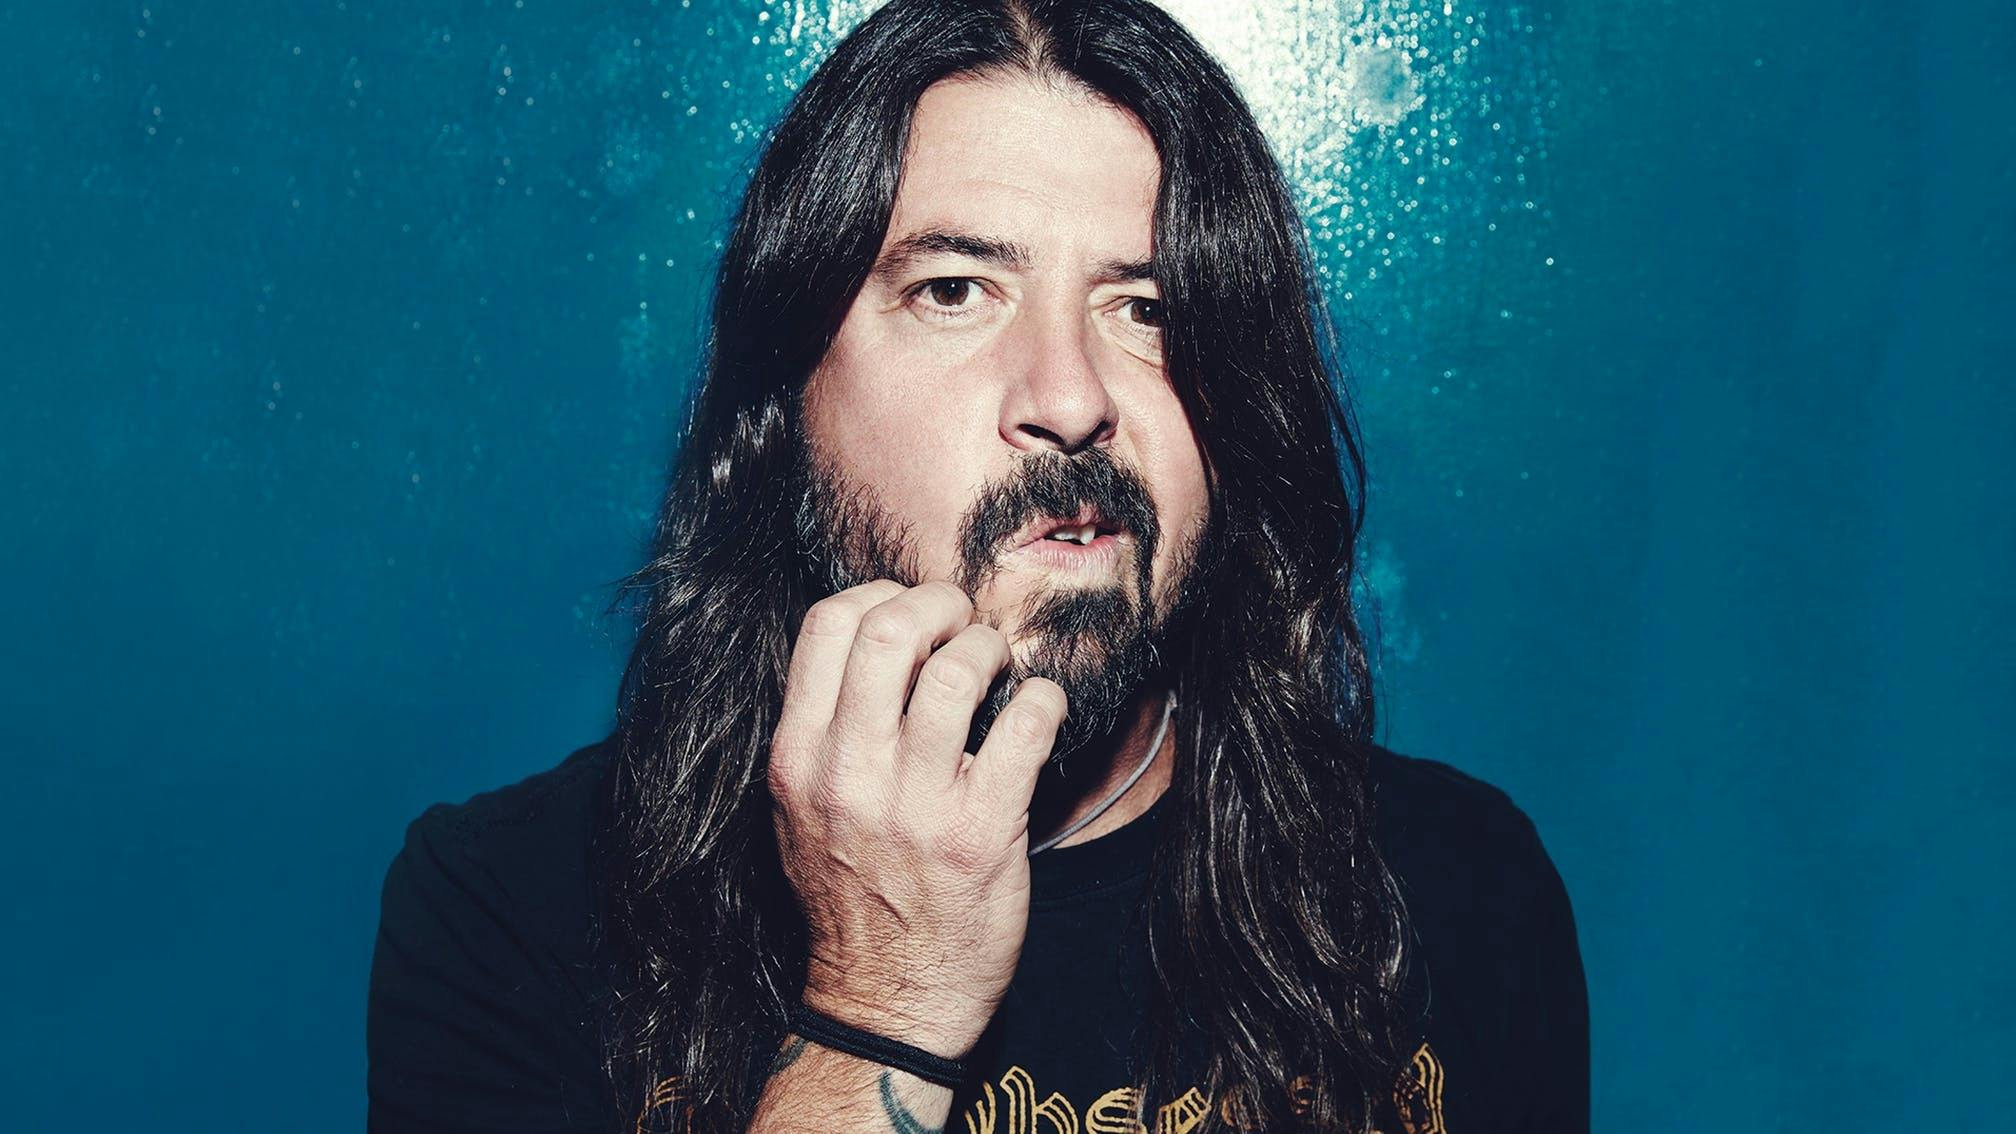 Dave Grohl On The Rise Of Nirvana: "It Was Entirely Pure. It Was Just Kids Banging On Instruments…"